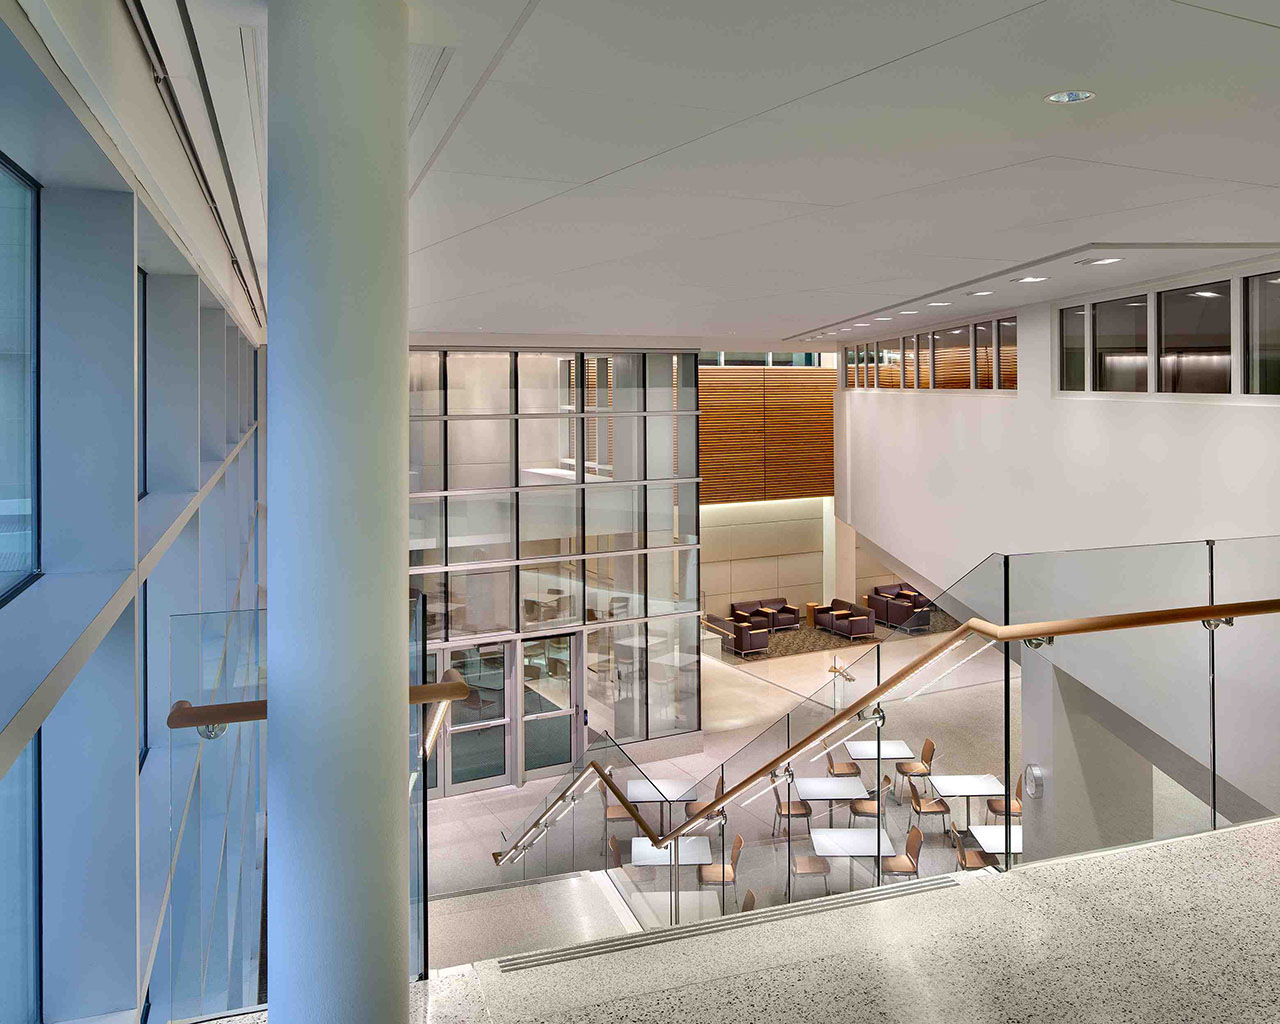 Interior of the Clinical and Translational Science Building at the University of Rochester by Francis Cauffman